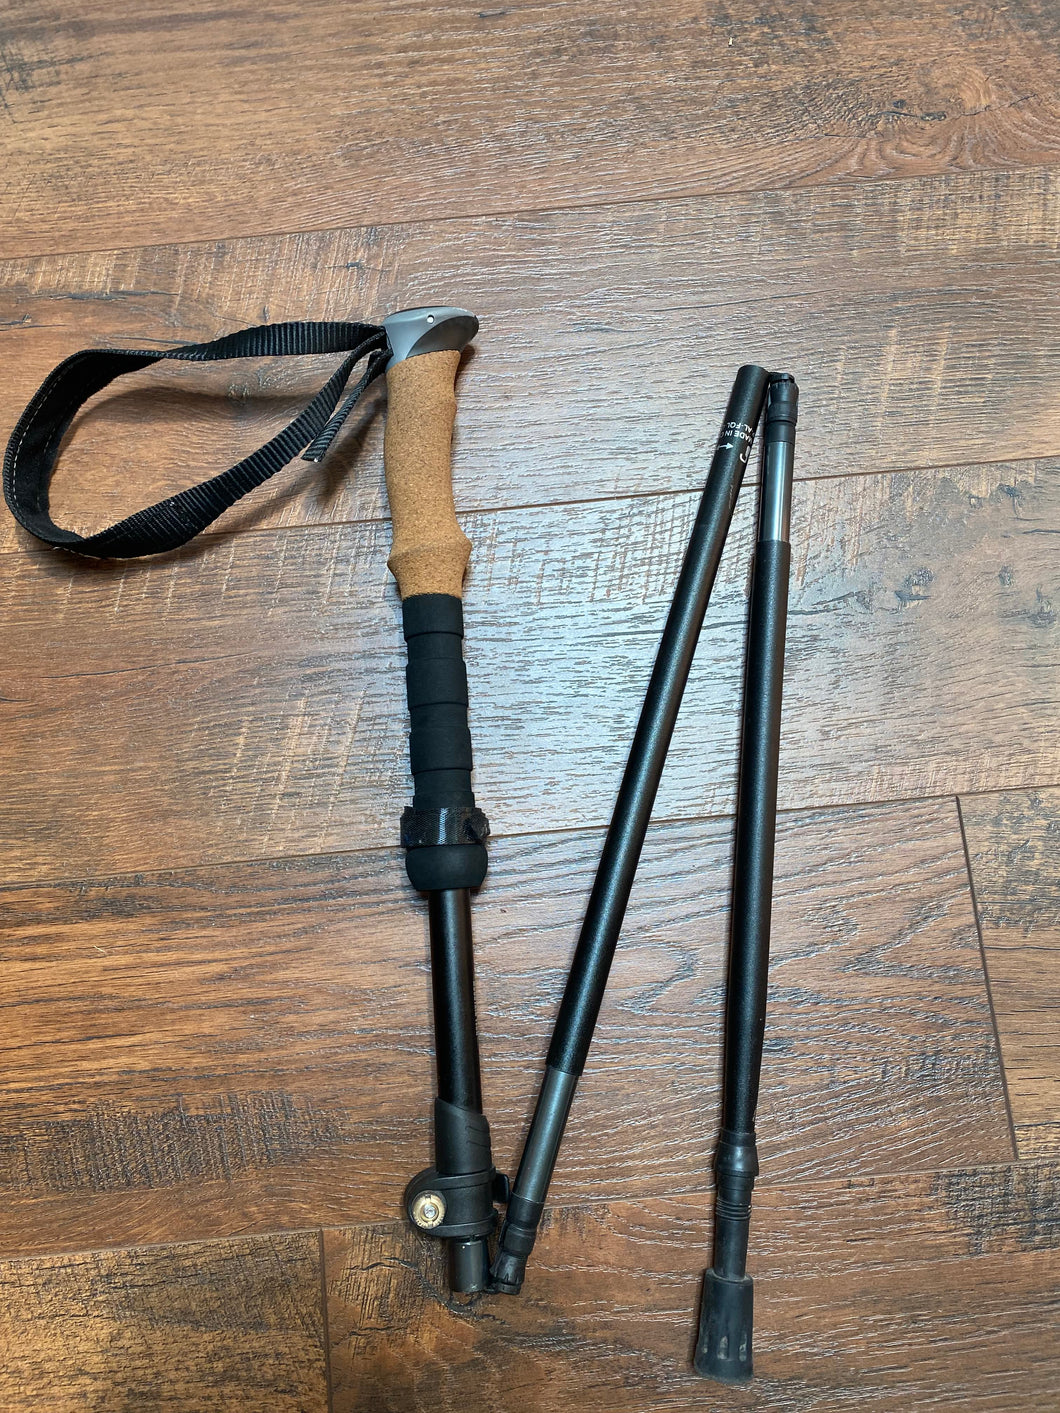 Black trekking pole with a cork grip and black wrist loop folded up in a z shape.